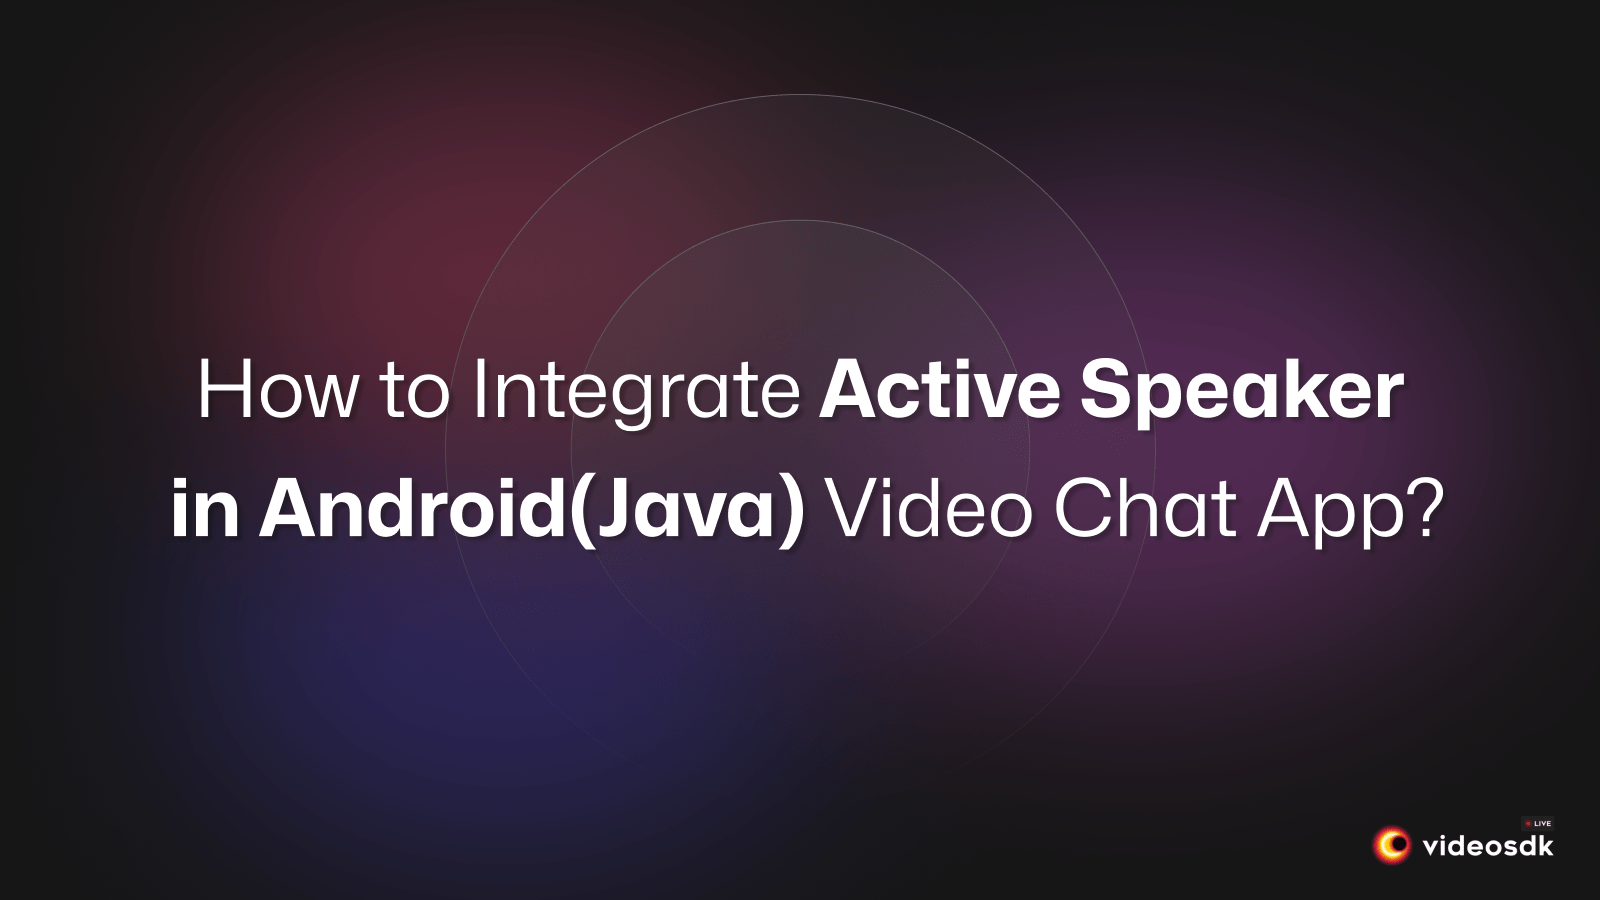 How to Integrate Active Speaker in Android(Java) Video Chat App?